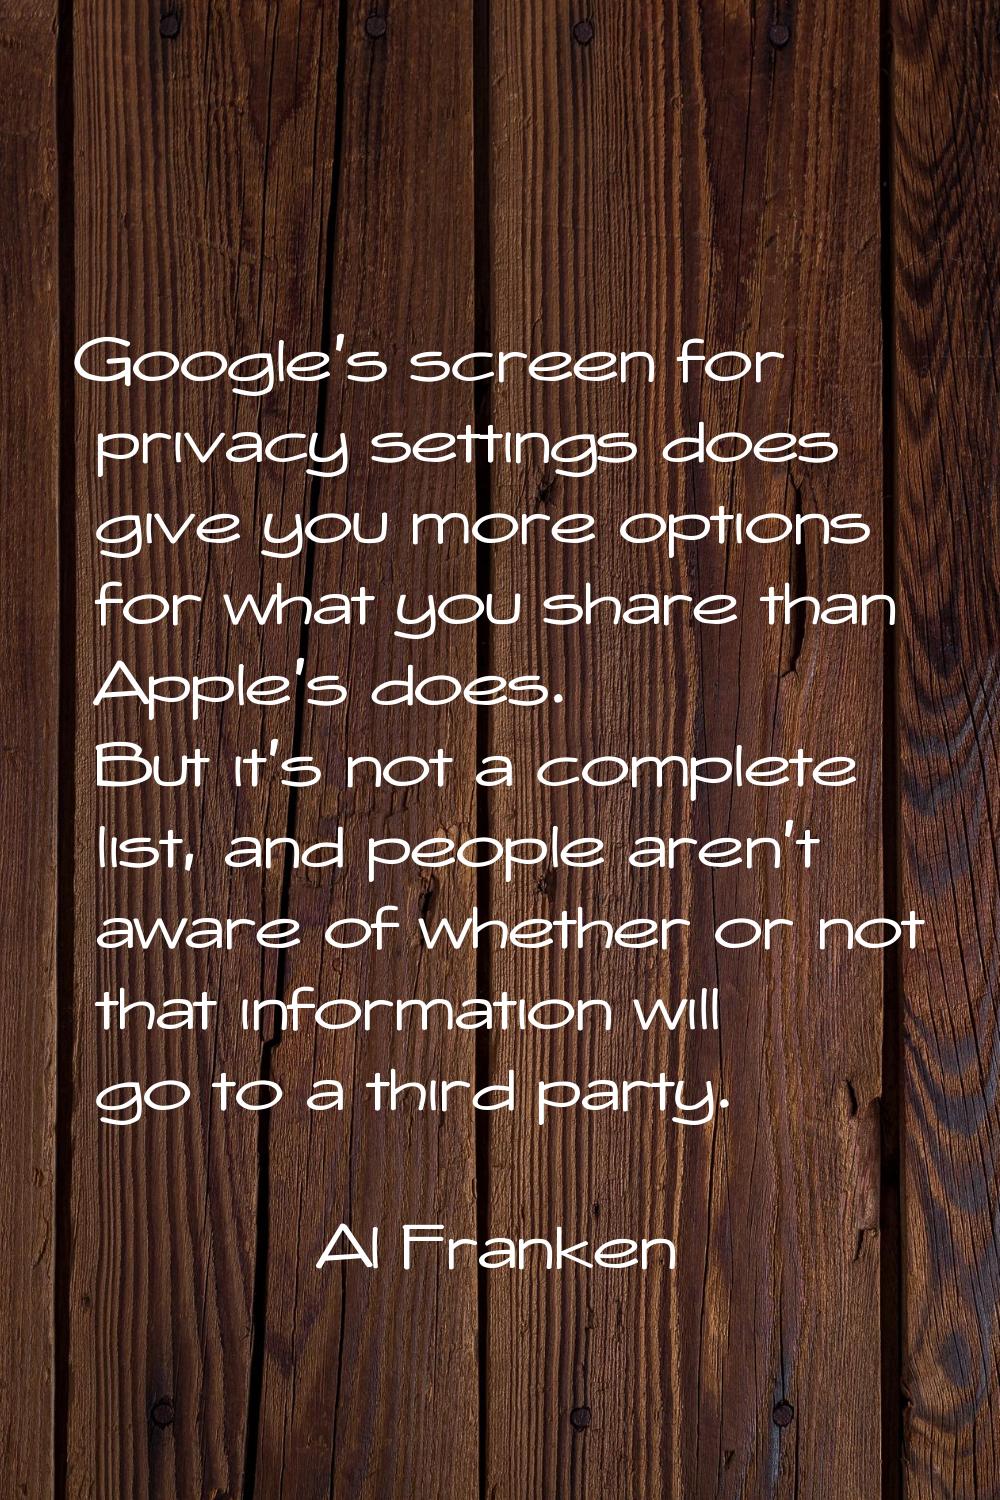 Google's screen for privacy settings does give you more options for what you share than Apple's doe